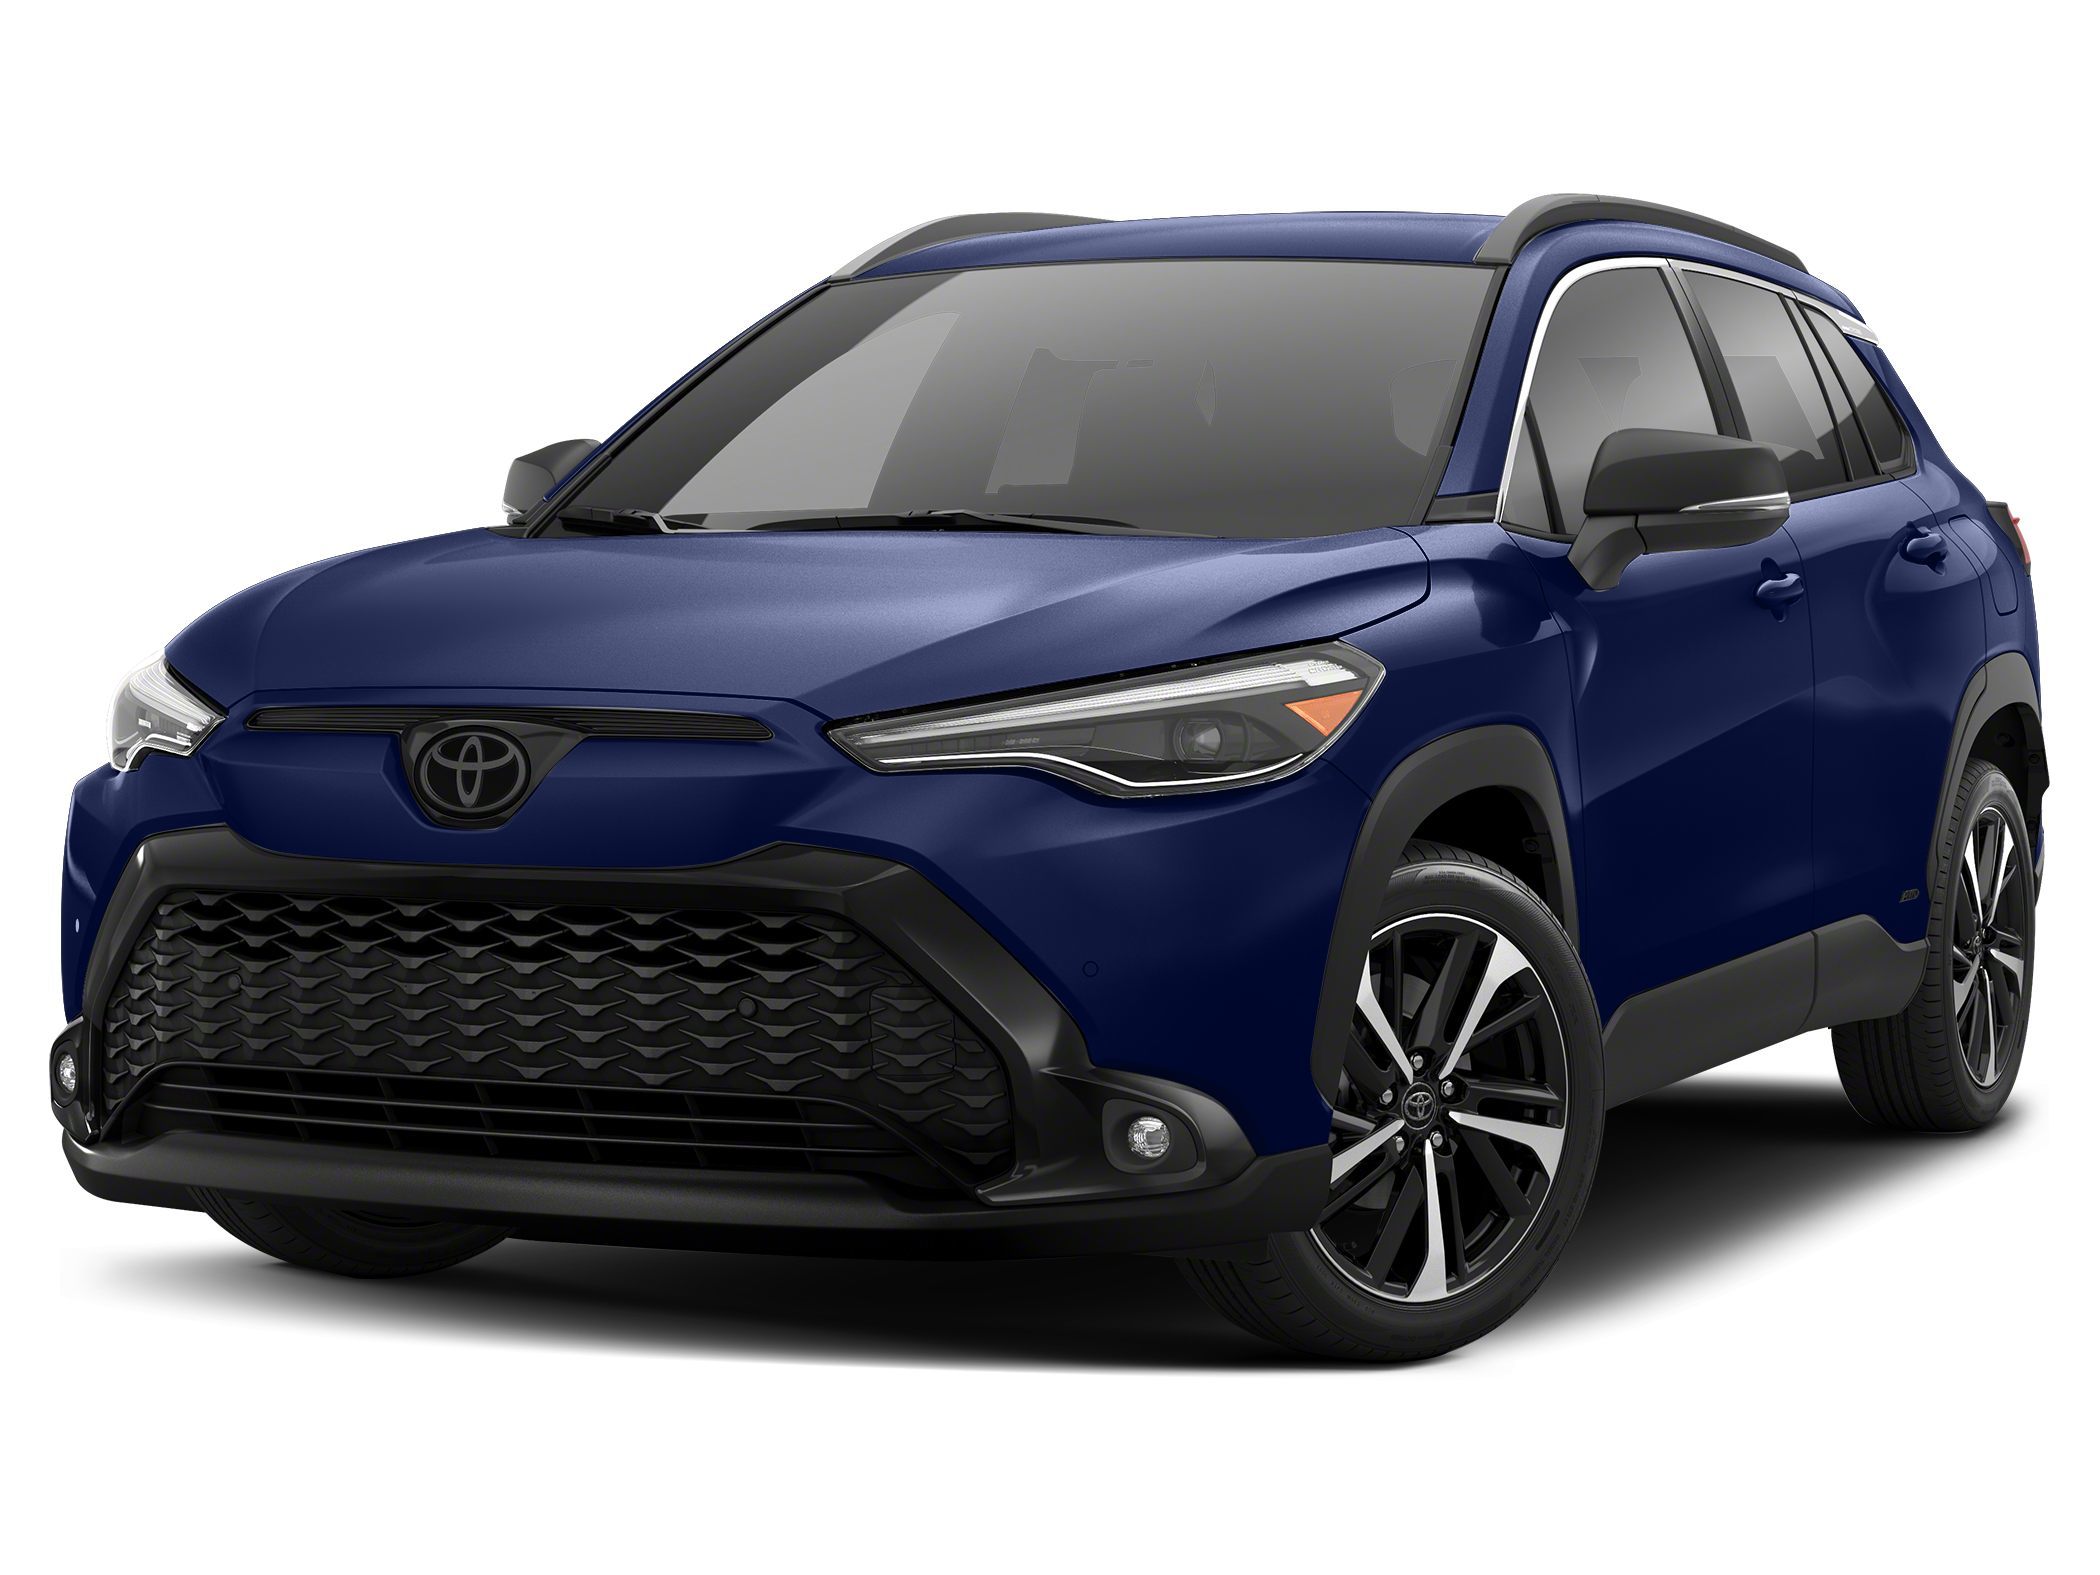 Toyota Expands Corolla Cross Lineup With New Hybrid System